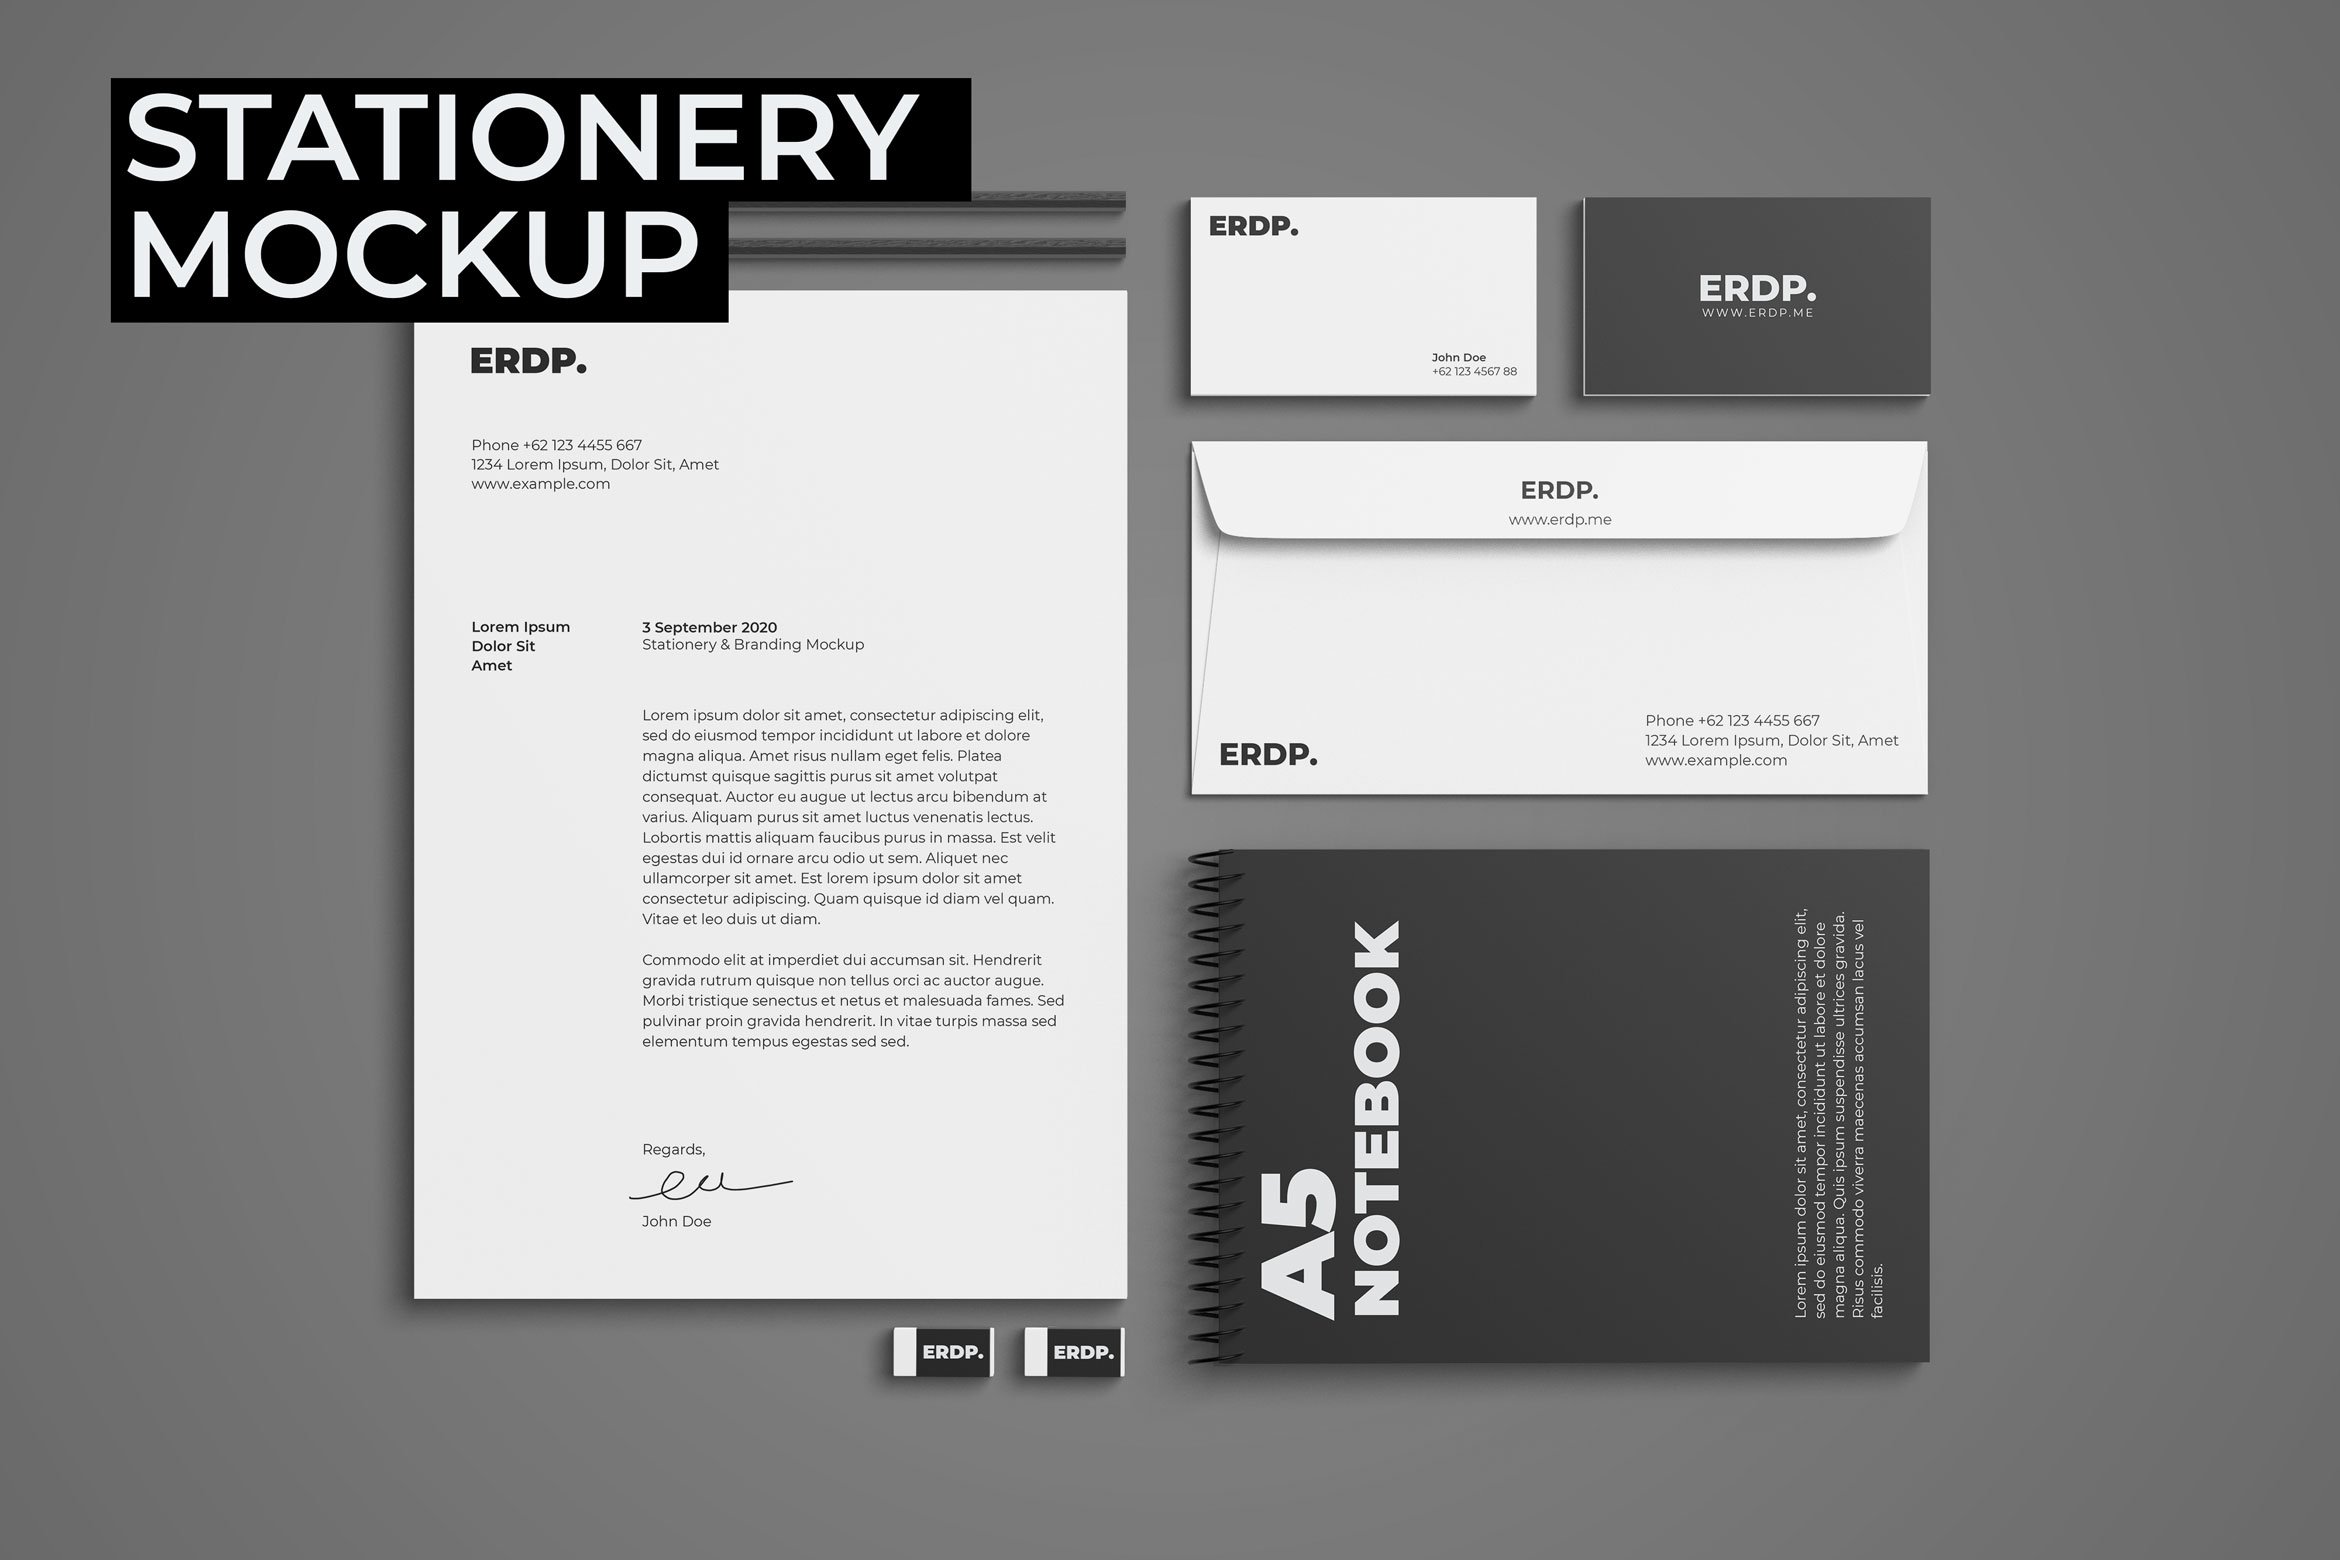 Stationery Mockup Photoshop template cover image.